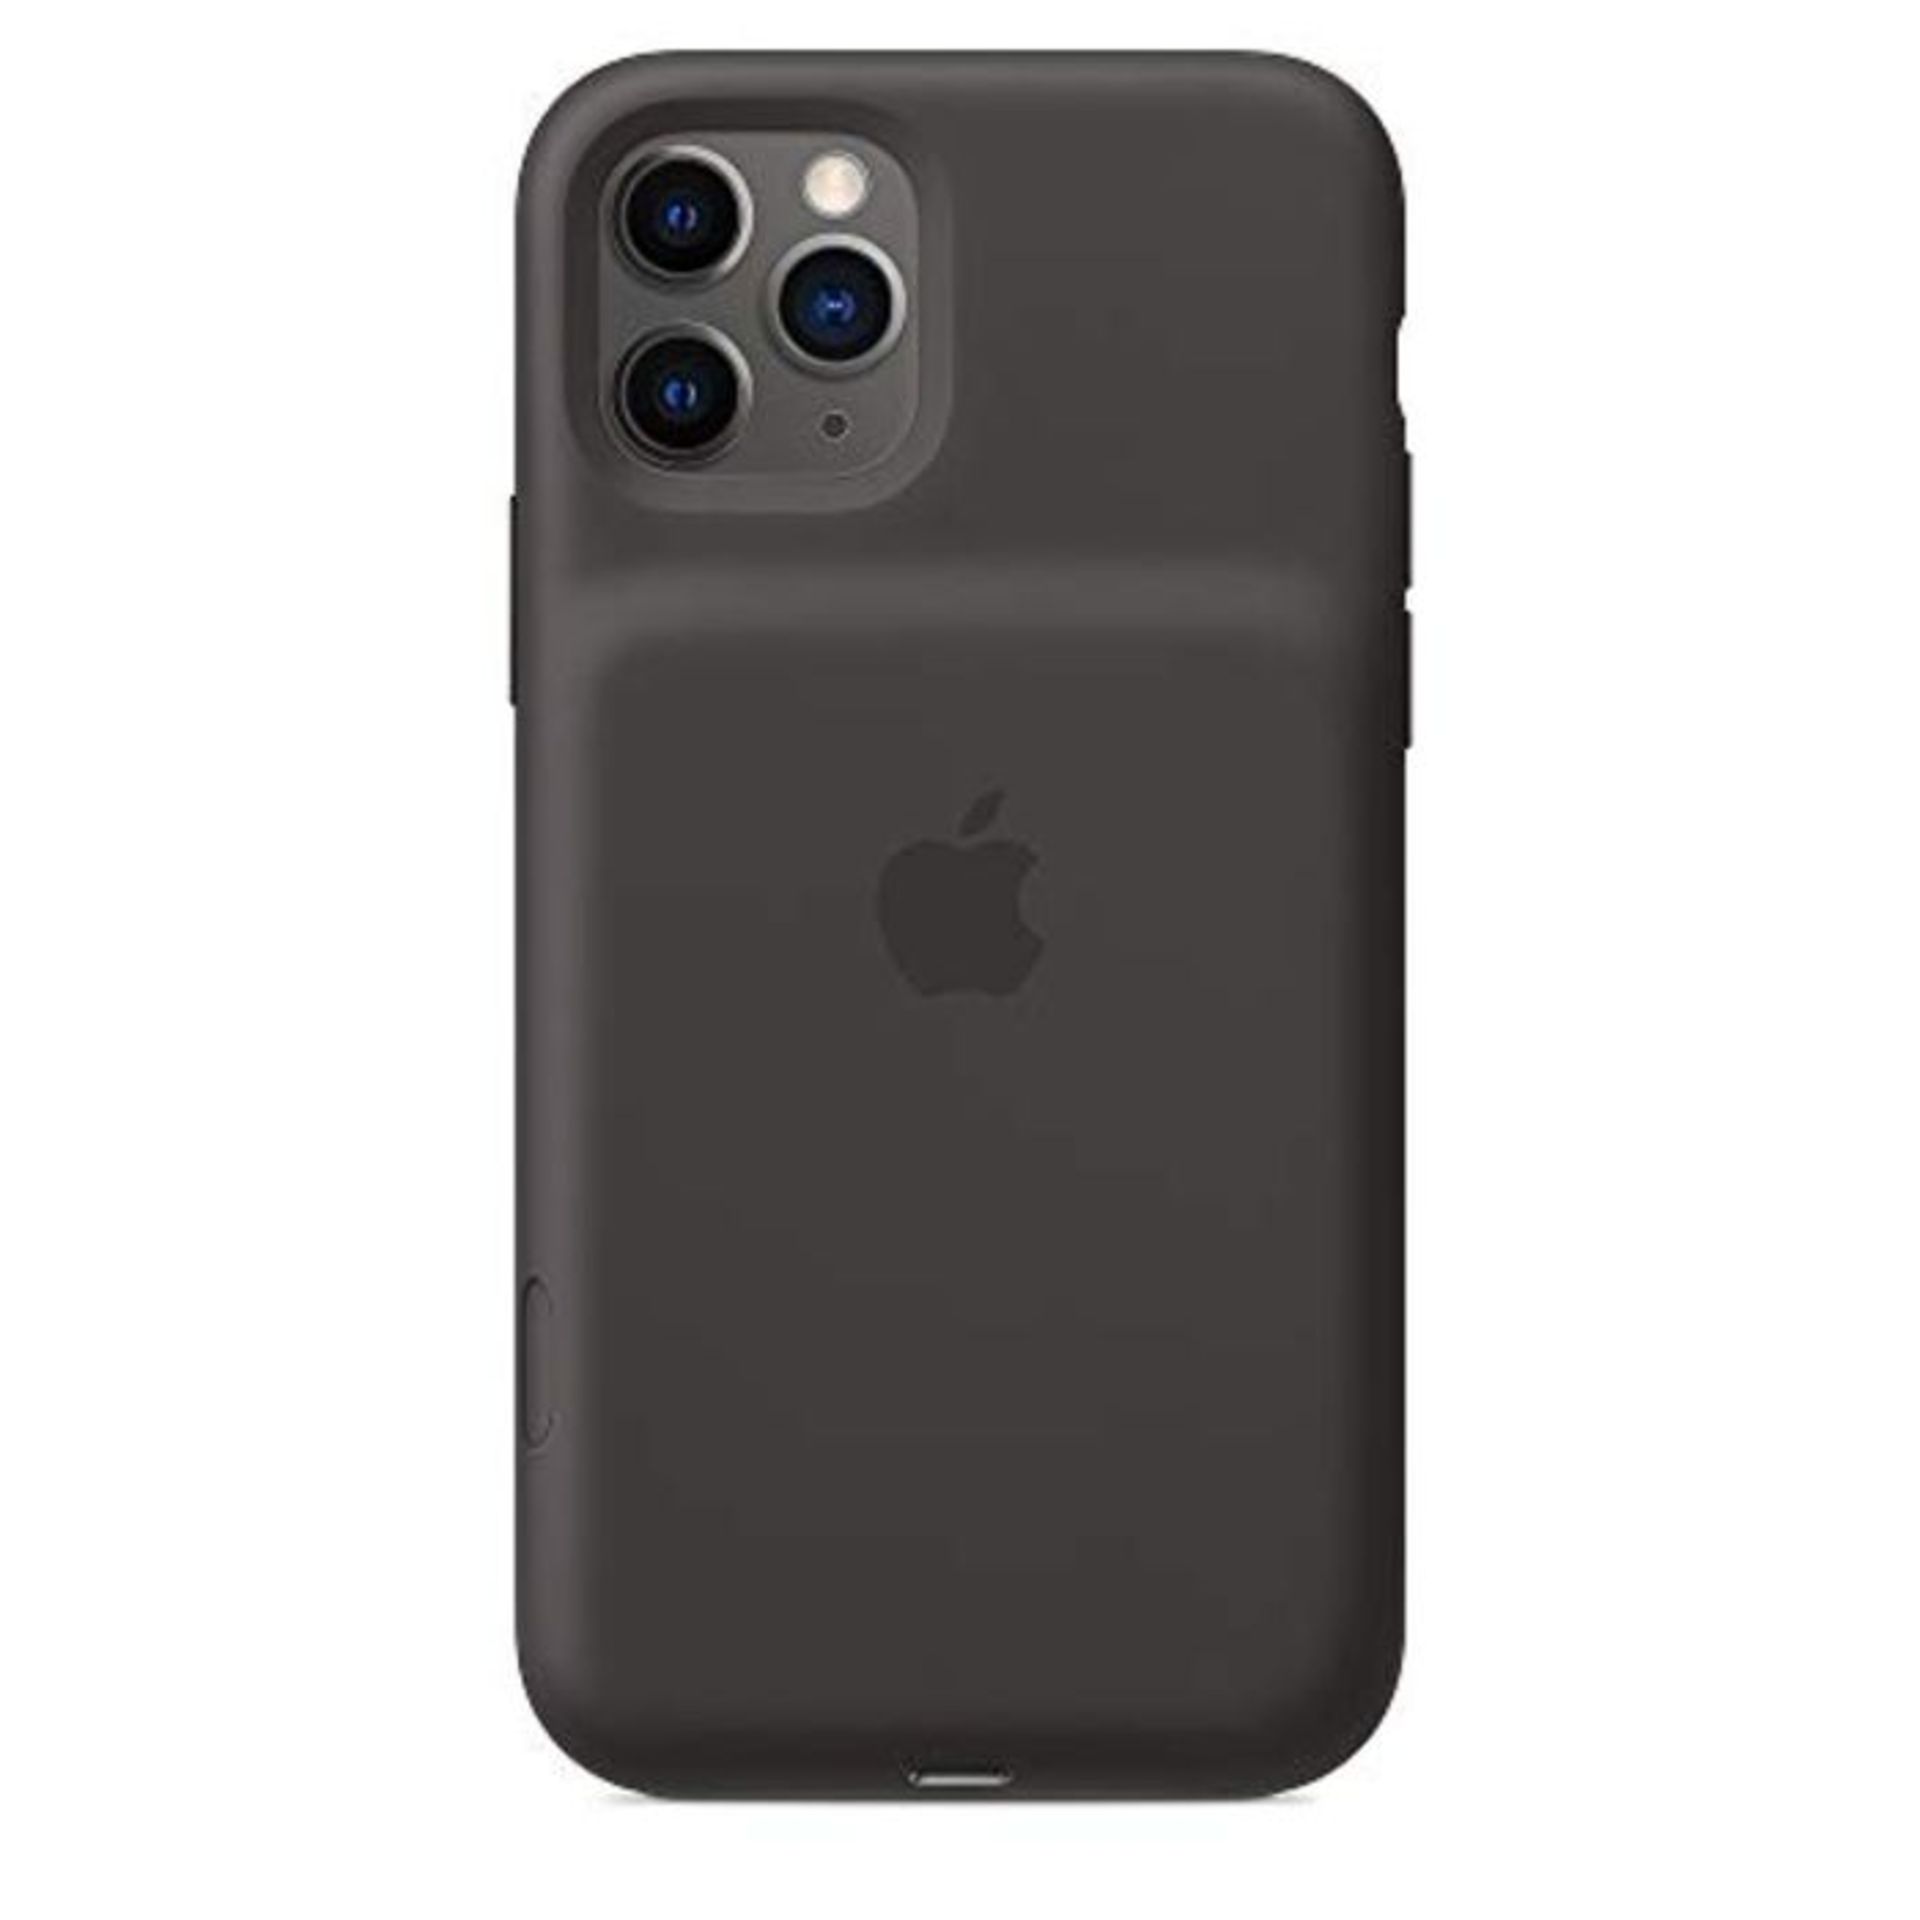 RRP £122.00 [CRACKED] Apple Smart Battery Case with Wireless Charging (for iPhone 11 Pro) - Black - Image 6 of 9